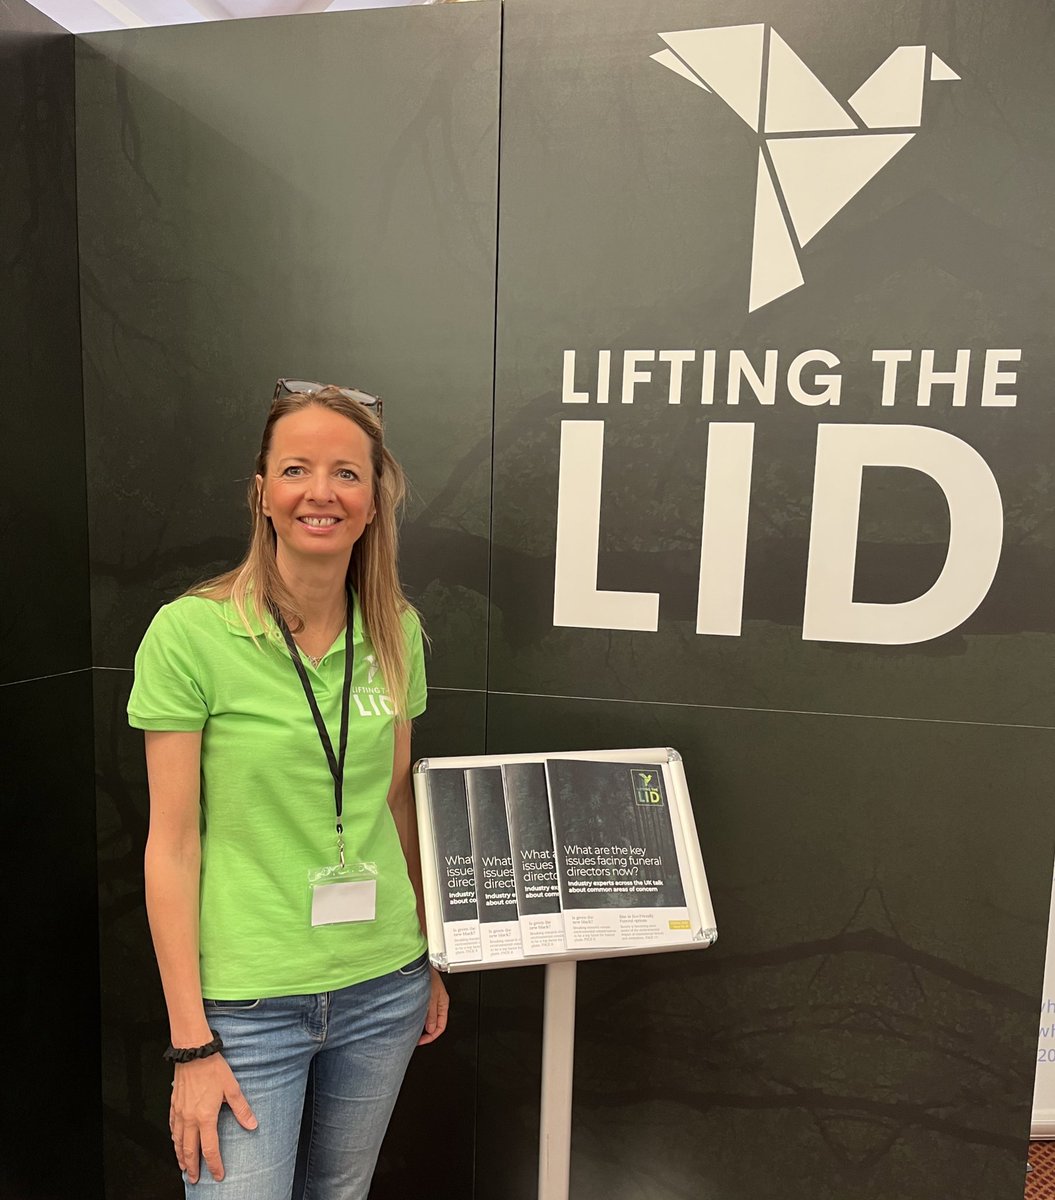 🚨 we are LIVE! Come and see us today at the @the_AGFD and take a look at our brand new Funeral Industry magazine “Lifting The Lid” liftingthelid.online 💚 #LiftingTheLid #DiggingDeep